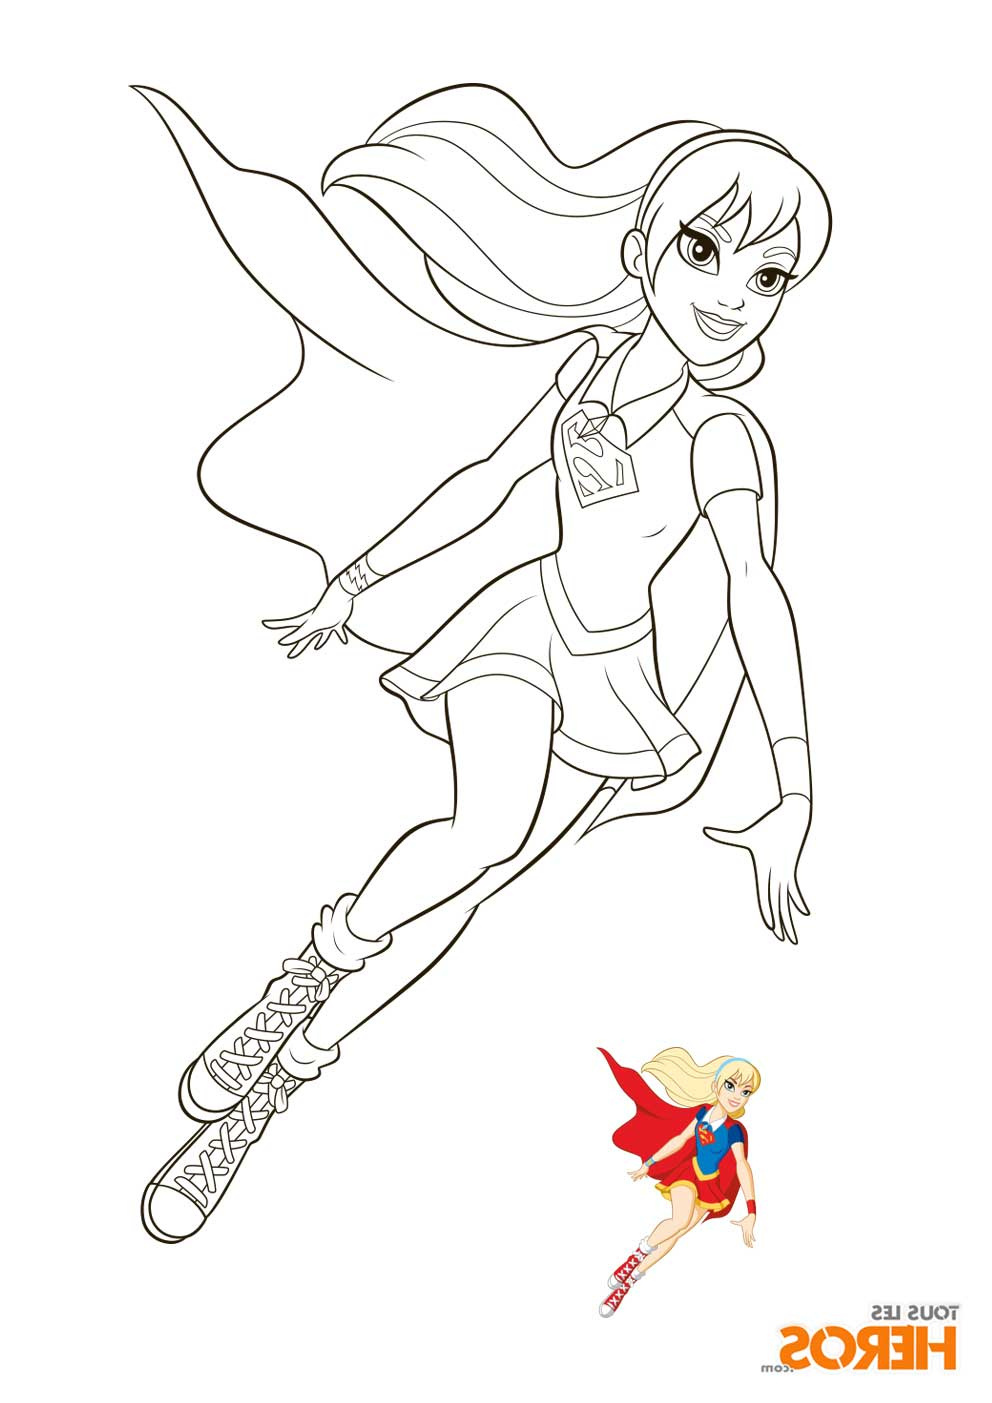 12 aimable coloriage heros images